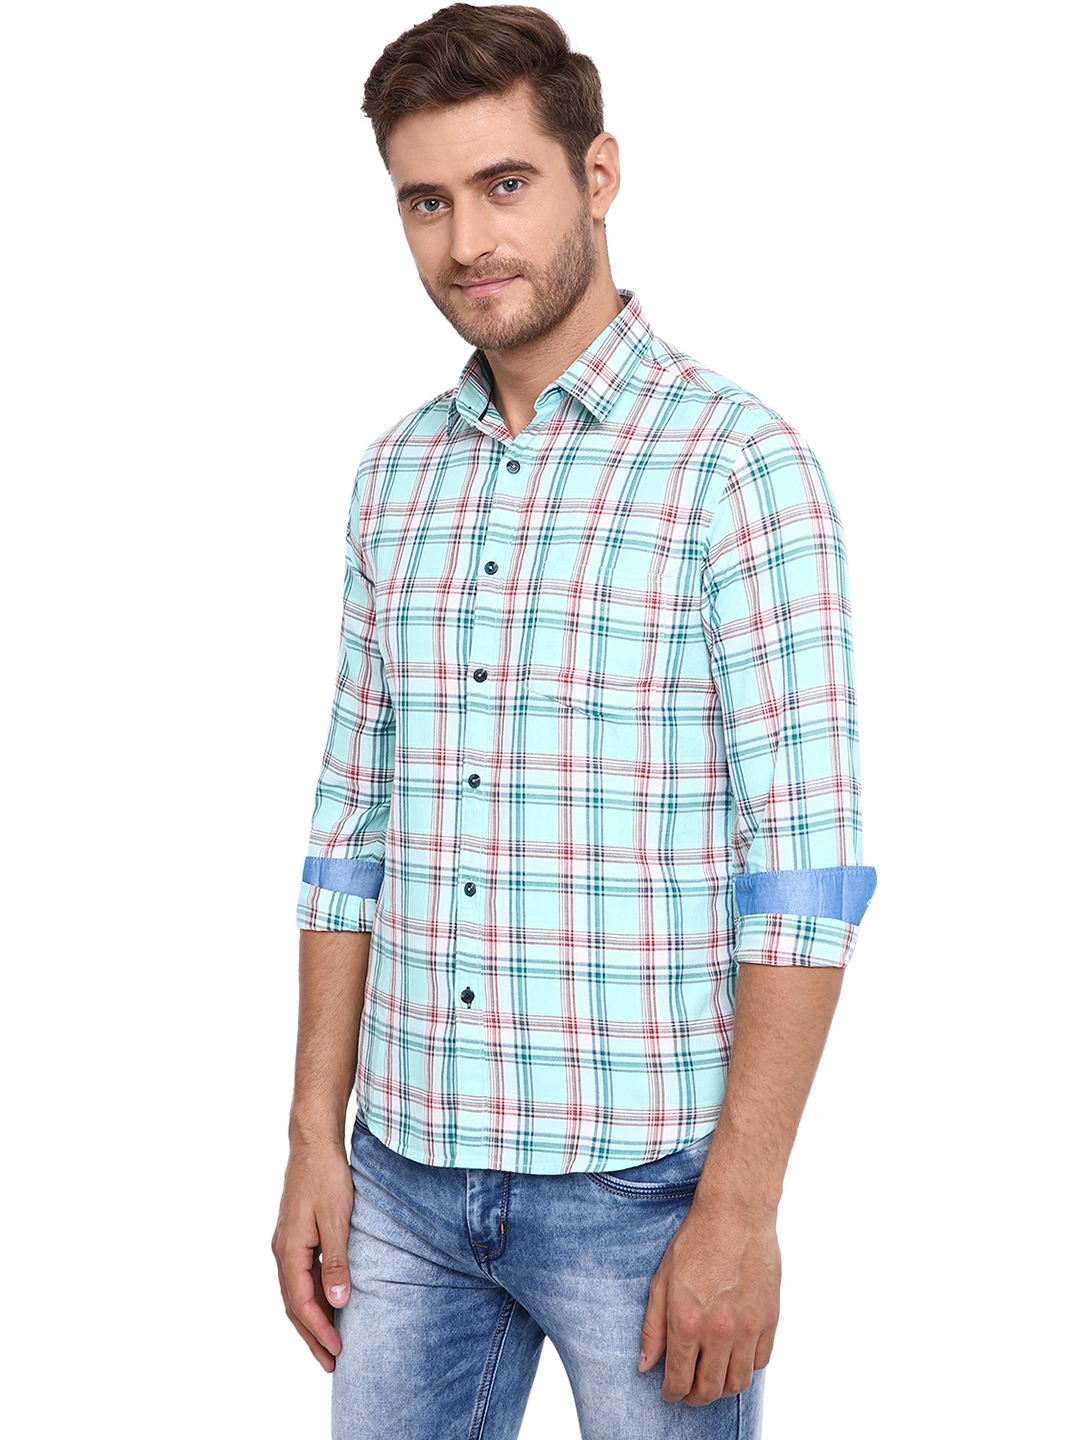 Greenfibre | Sky Blue Checked Slim Fit Casual Shirt | Greenfibre 1